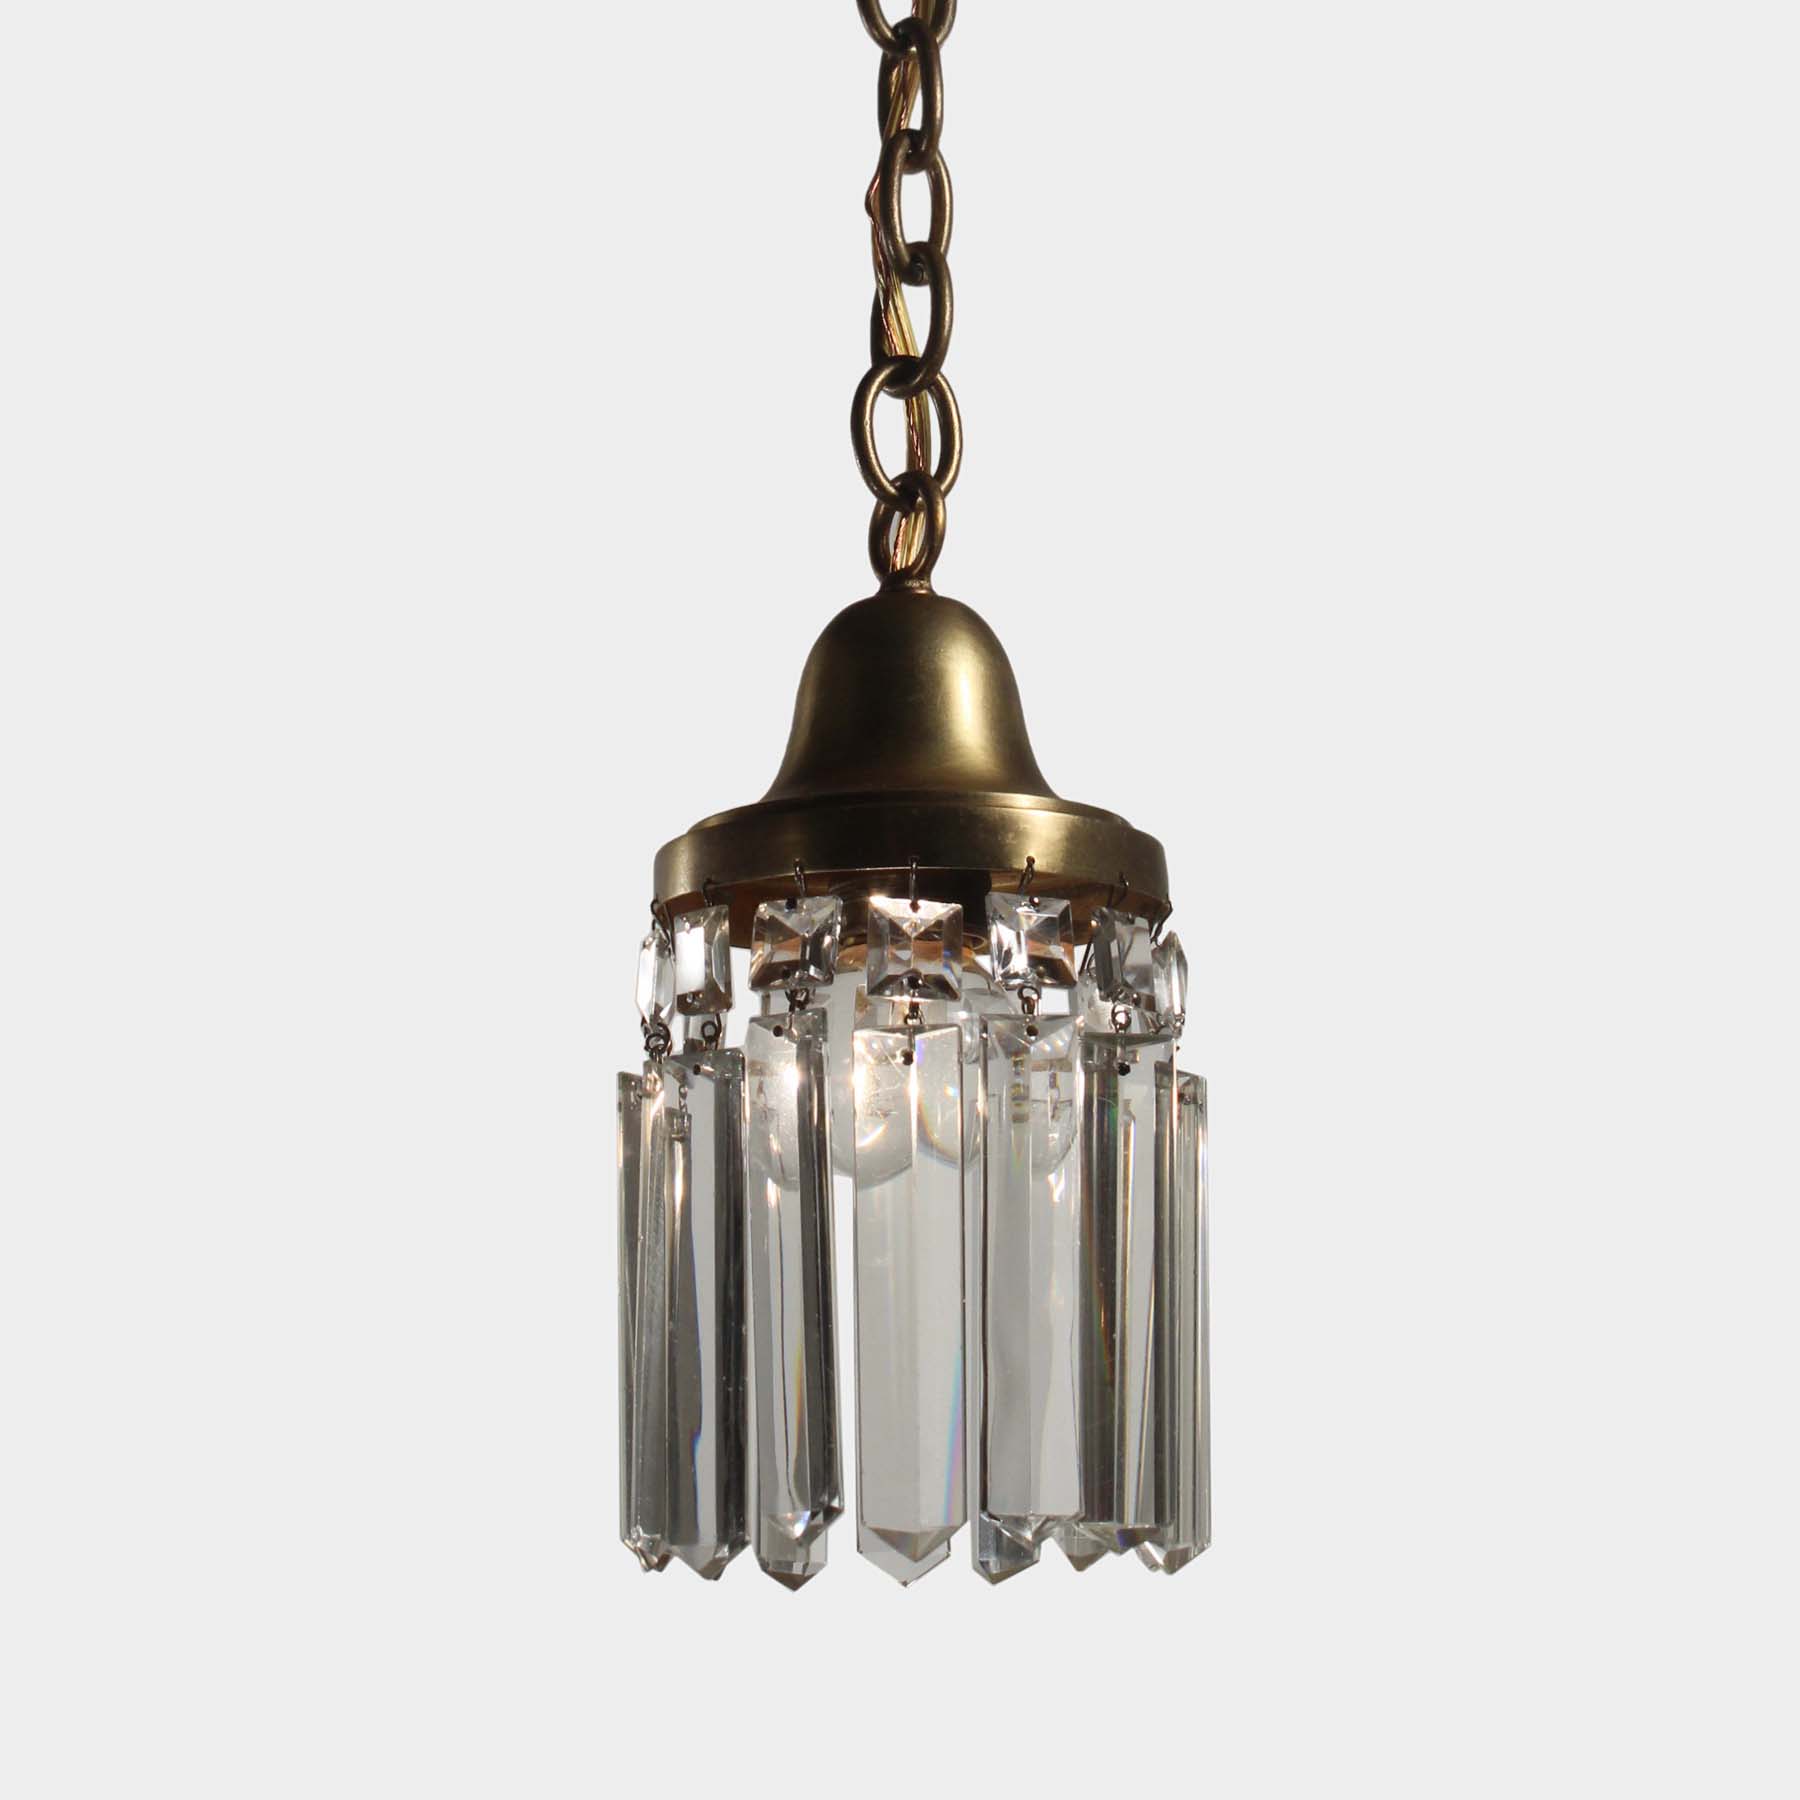 SOLD Antique Brass Pendant Light with Prisms, c. 1900-67538